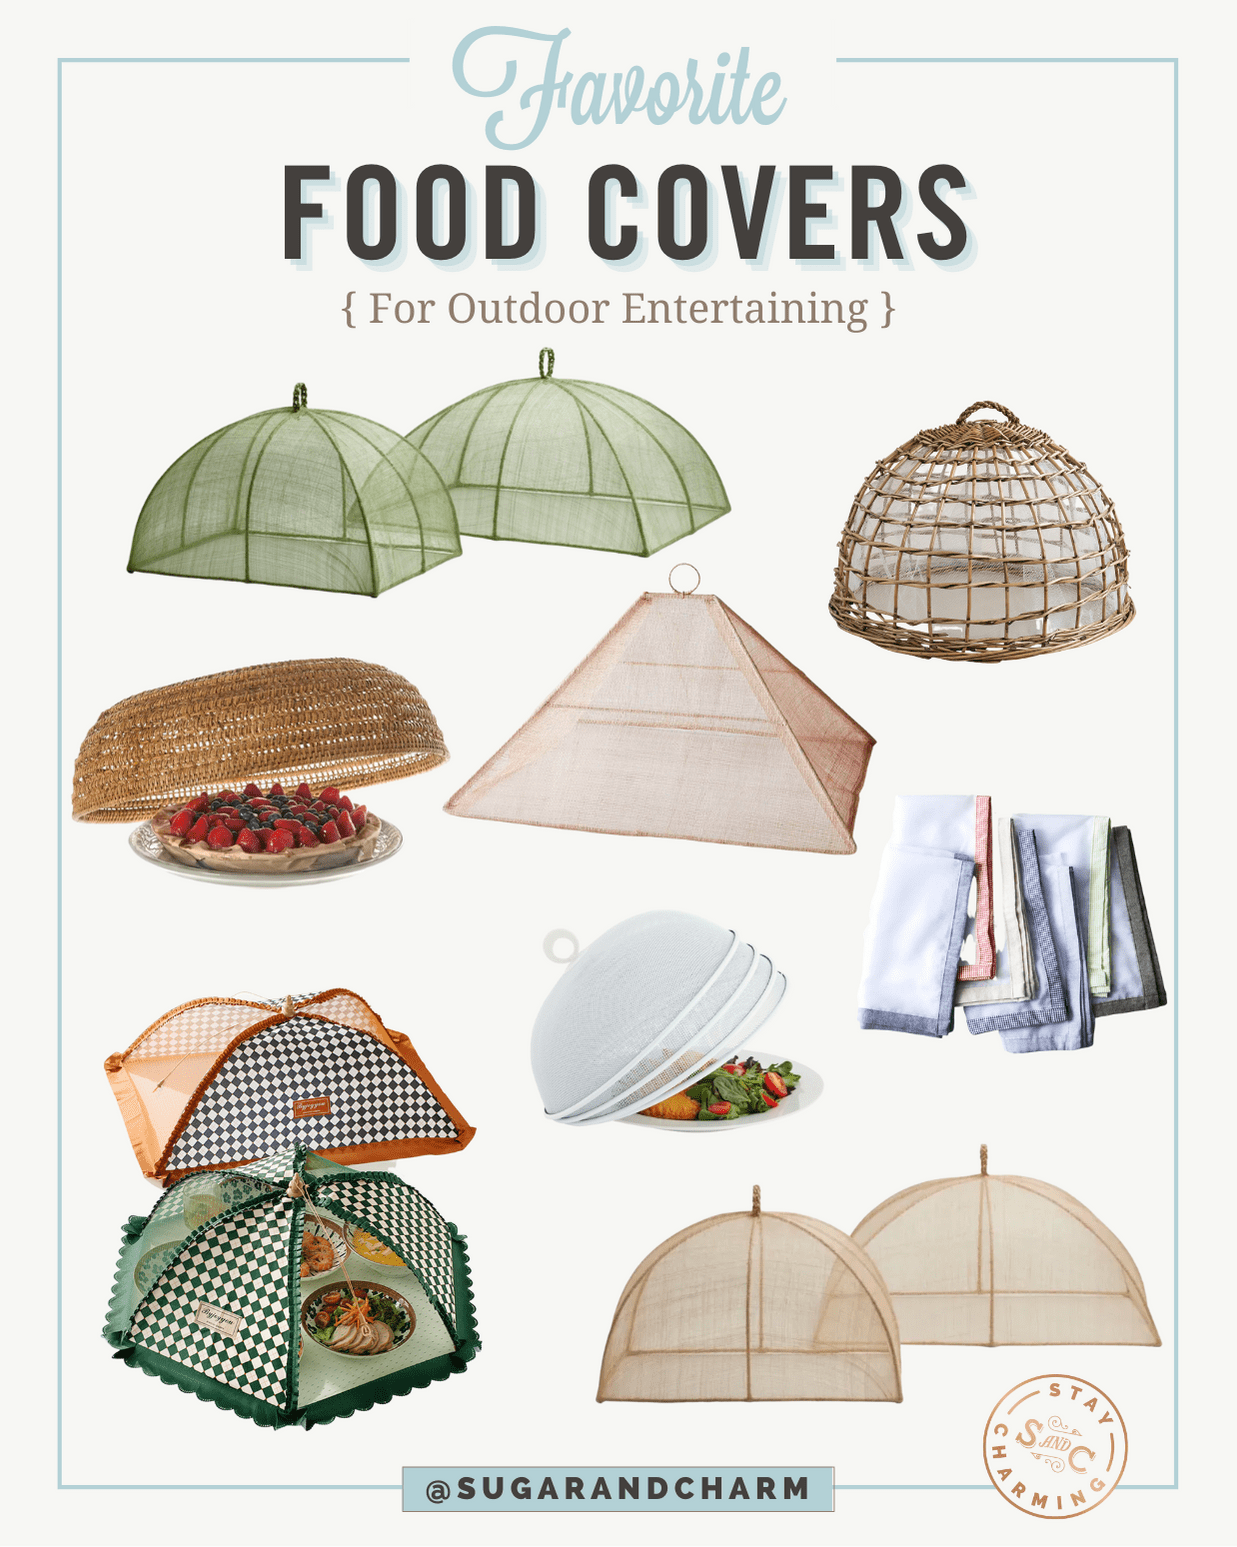 Food covers and food domes.